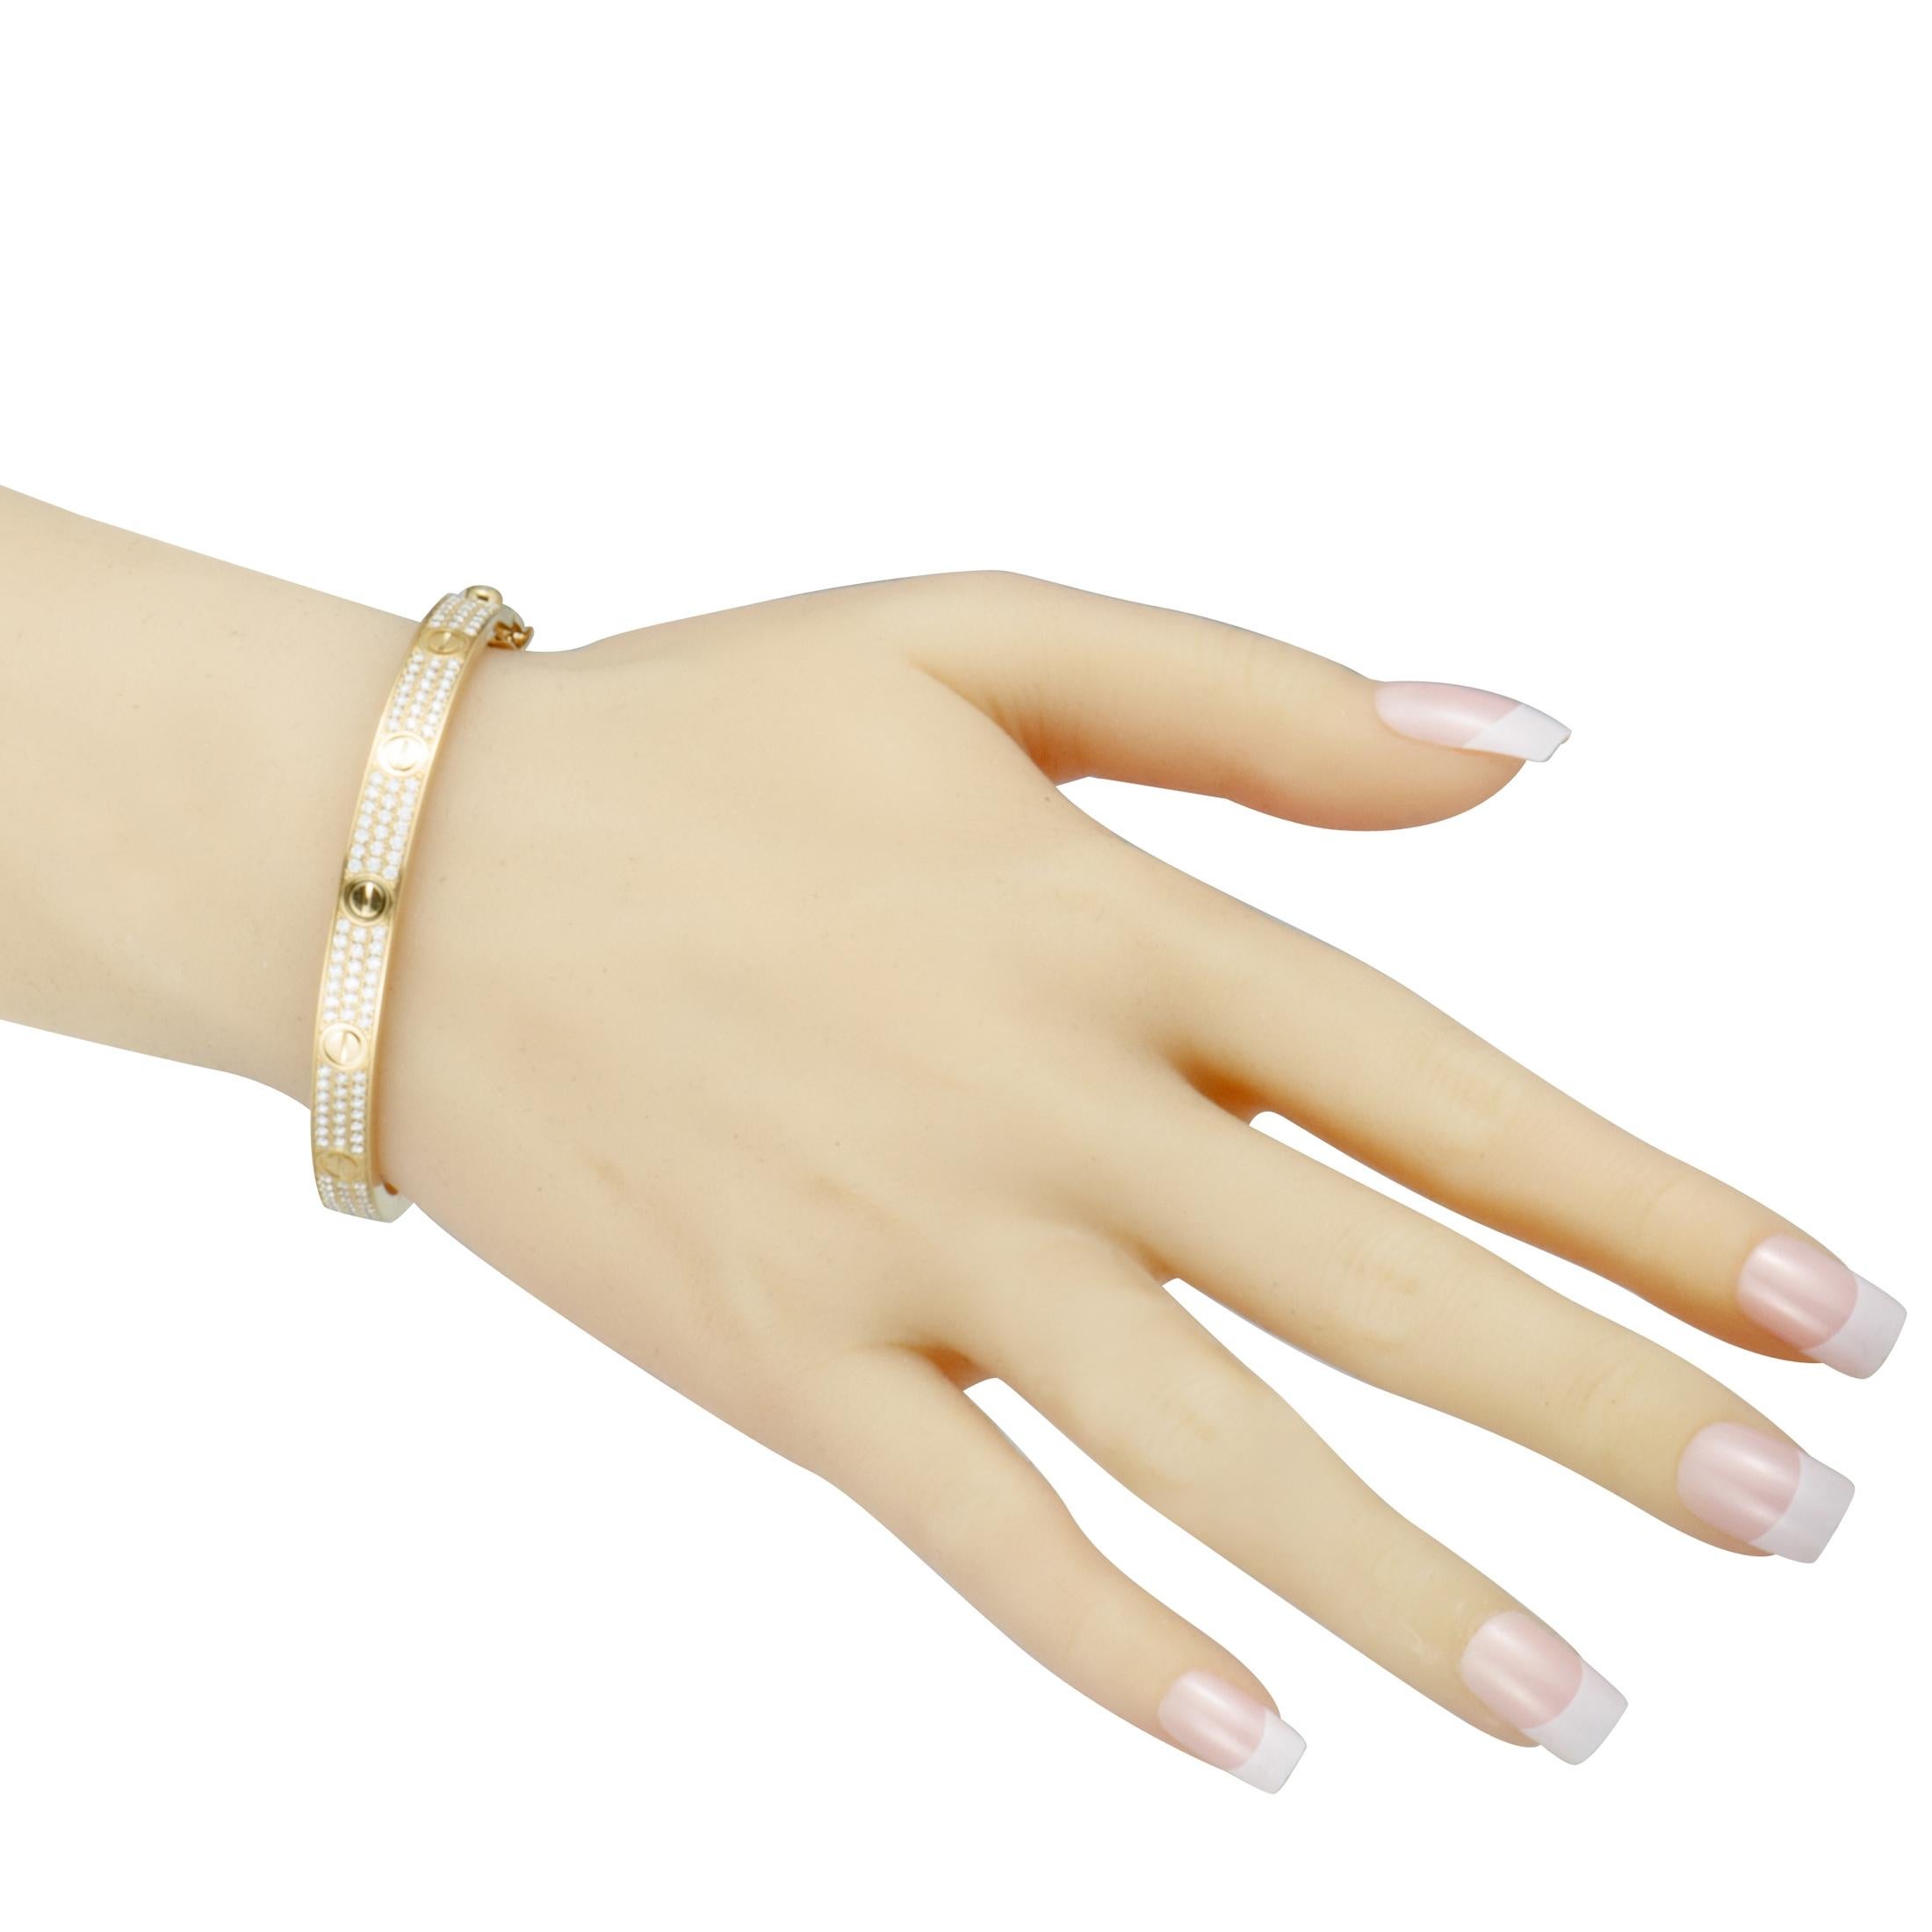 This sublime love bracelet by Cartier offers a look of utmost elegance. The gorgeous bracelet is expertly crafted from prestigious 18K yellow gold and is beautifully embellished with scintillating diamonds.
